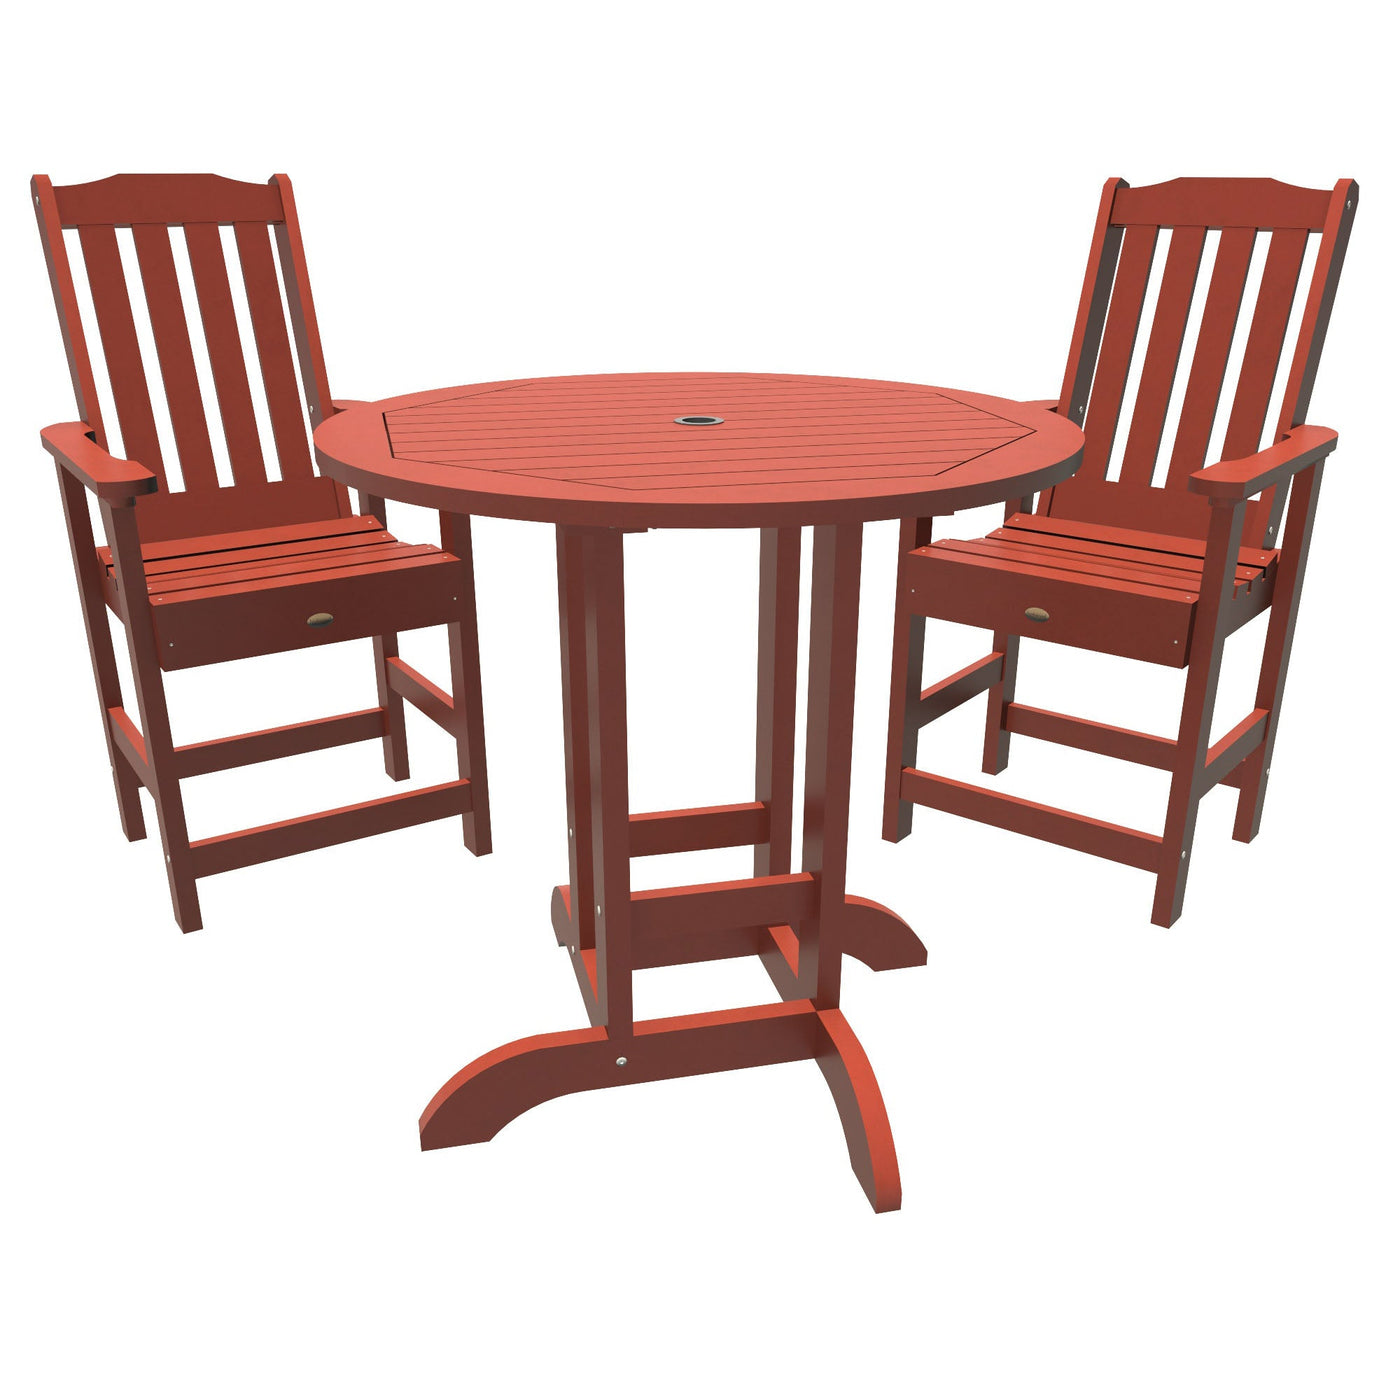 Lehigh 3pc 36in Round Dining Set - Counter Height Dining Highwood USA Rustic Red 